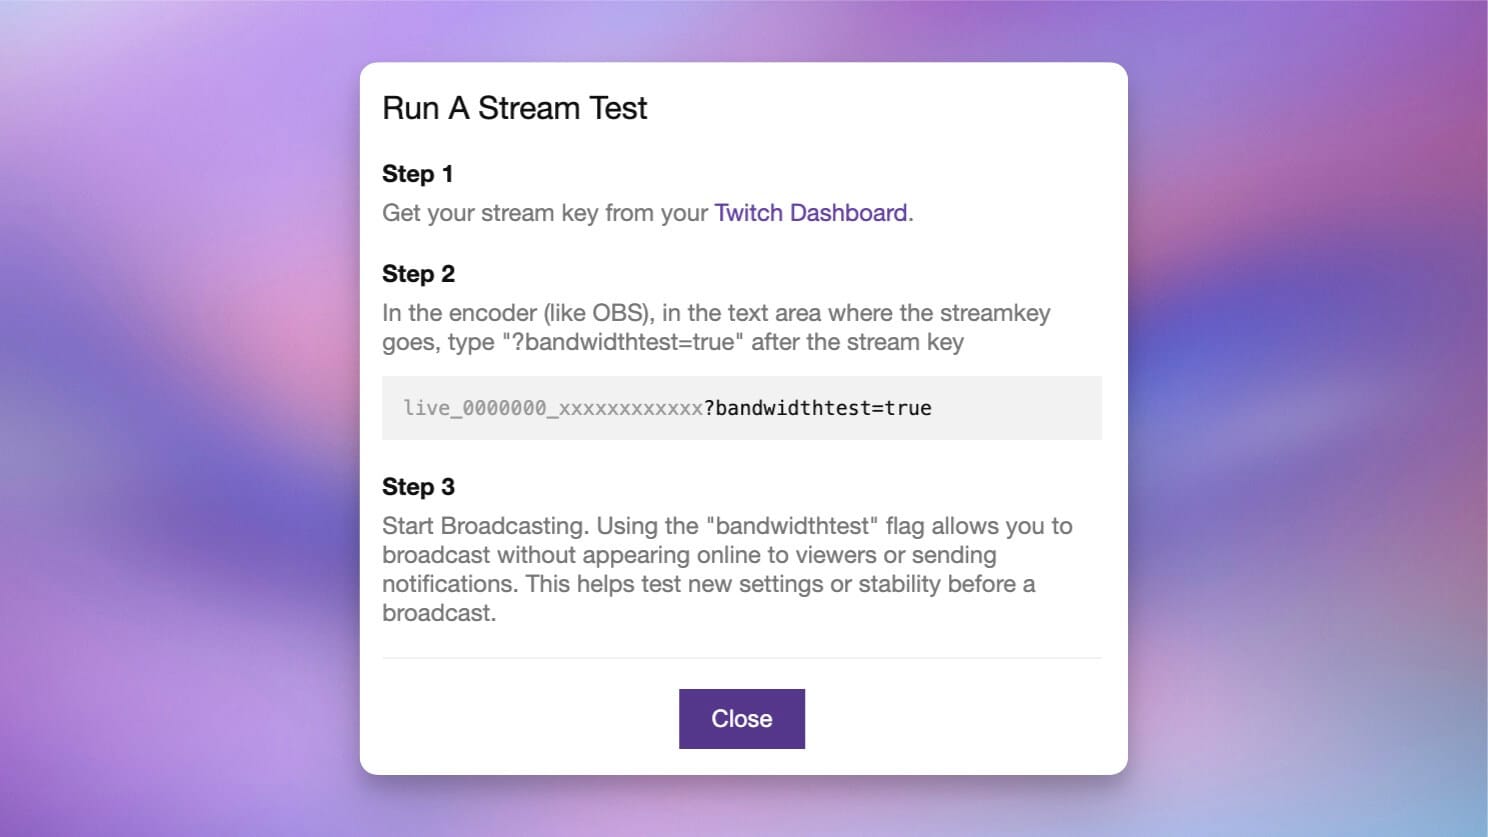 Steps on how to run a stream test on Twitch